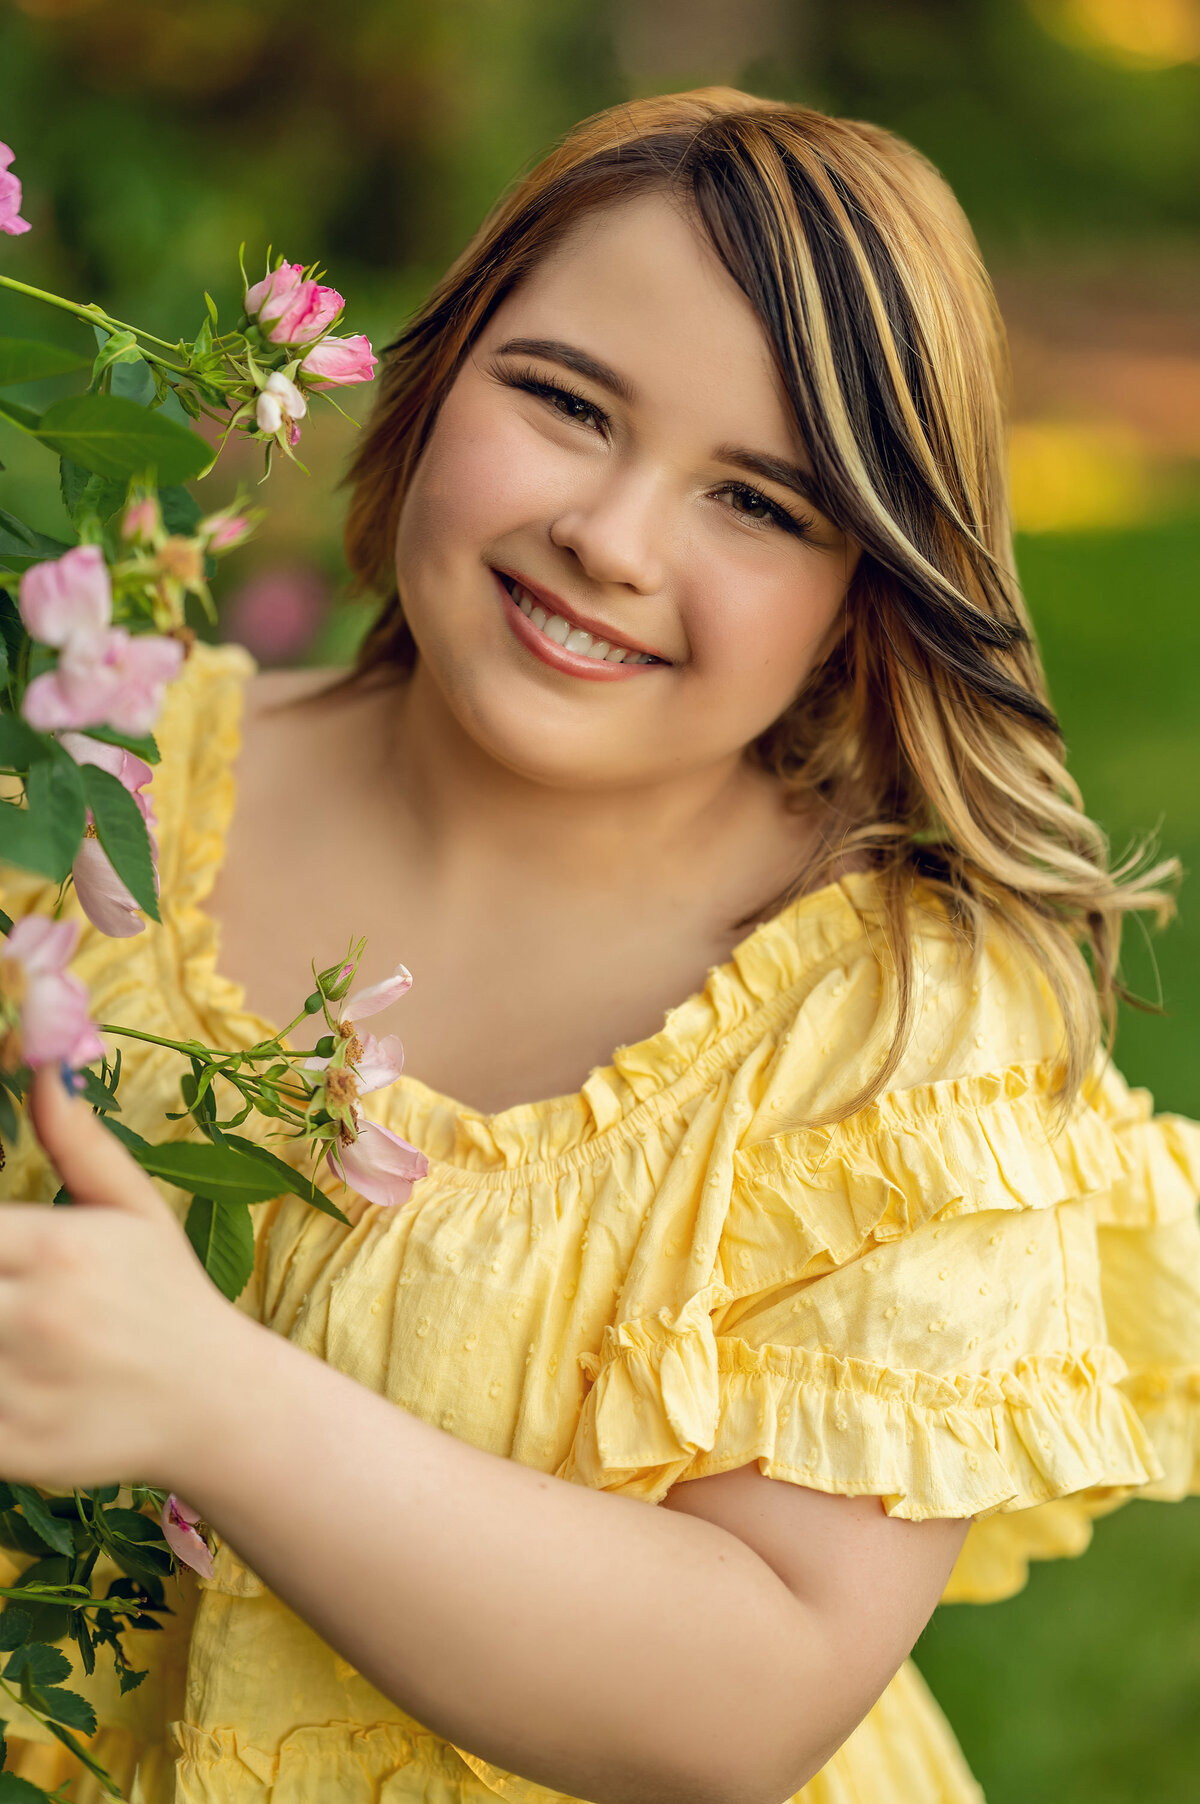 A young woman from Oconomowoc High School leans against a floral trellis wearing a yellow sundress for her senior portraits.